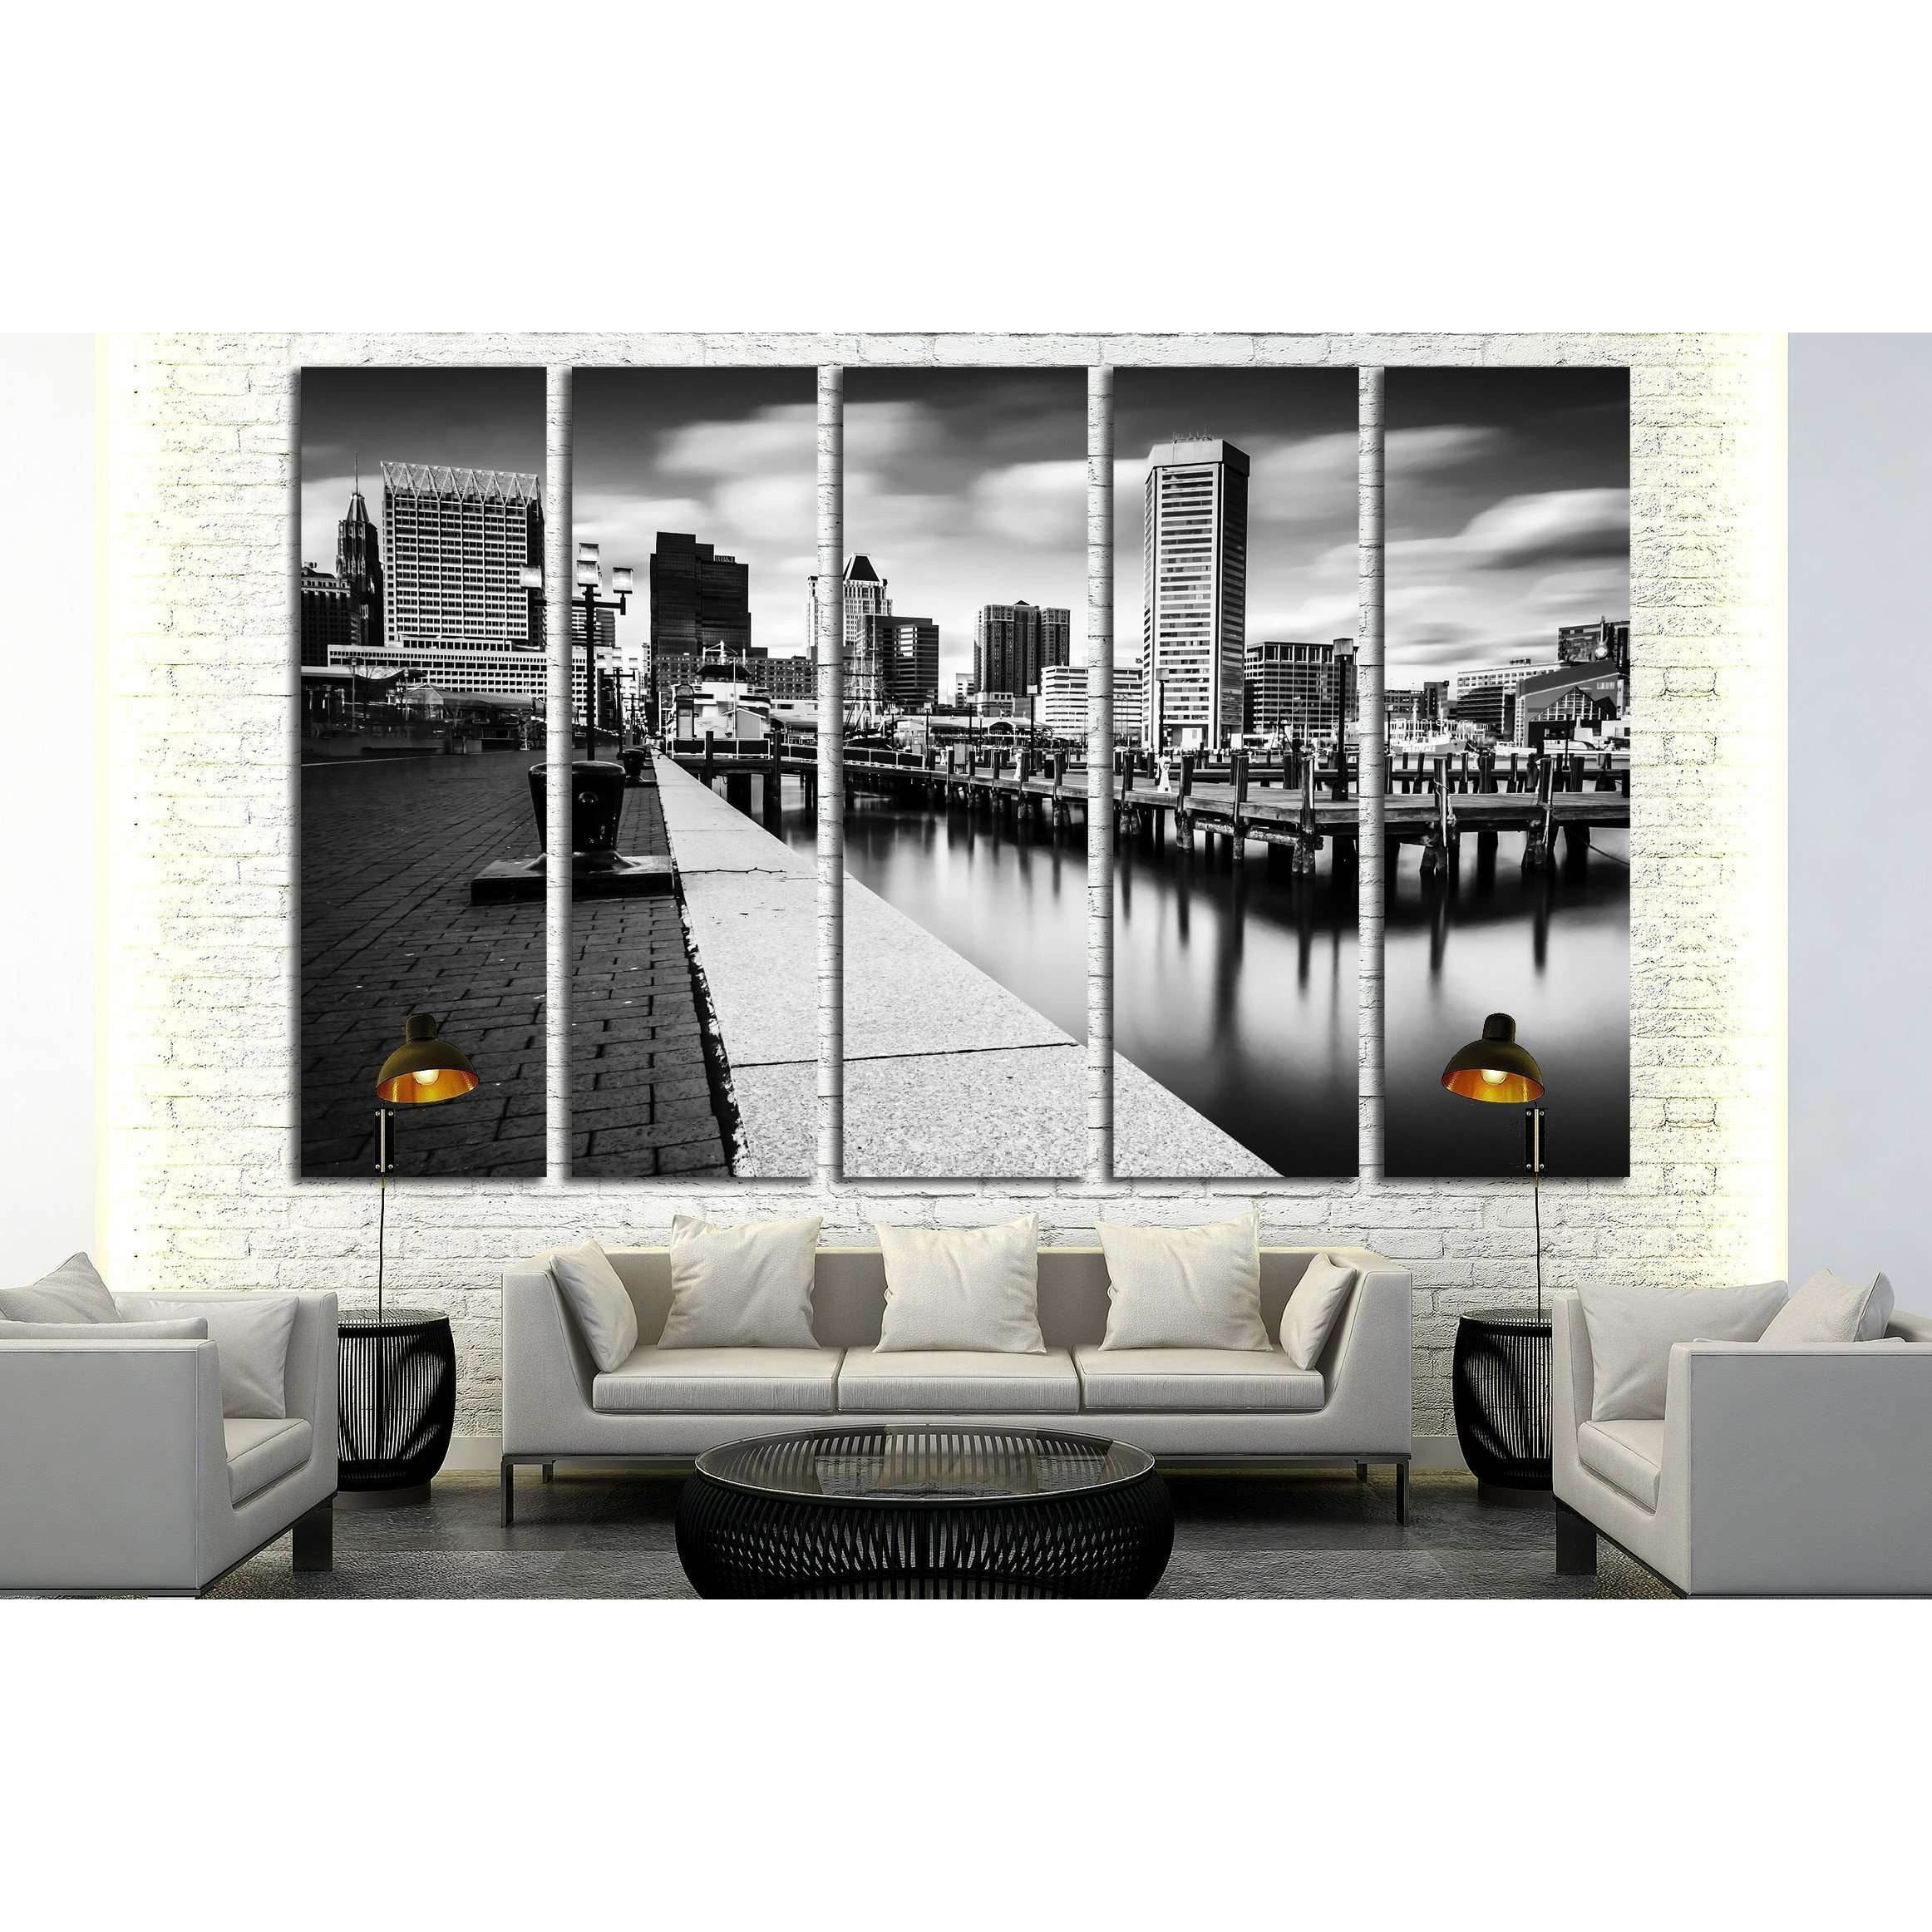 Long exposure of the Baltimore Skyline and Inner Harbor Promenade, Baltimore, Maryland №2177 Ready to Hang Canvas Print